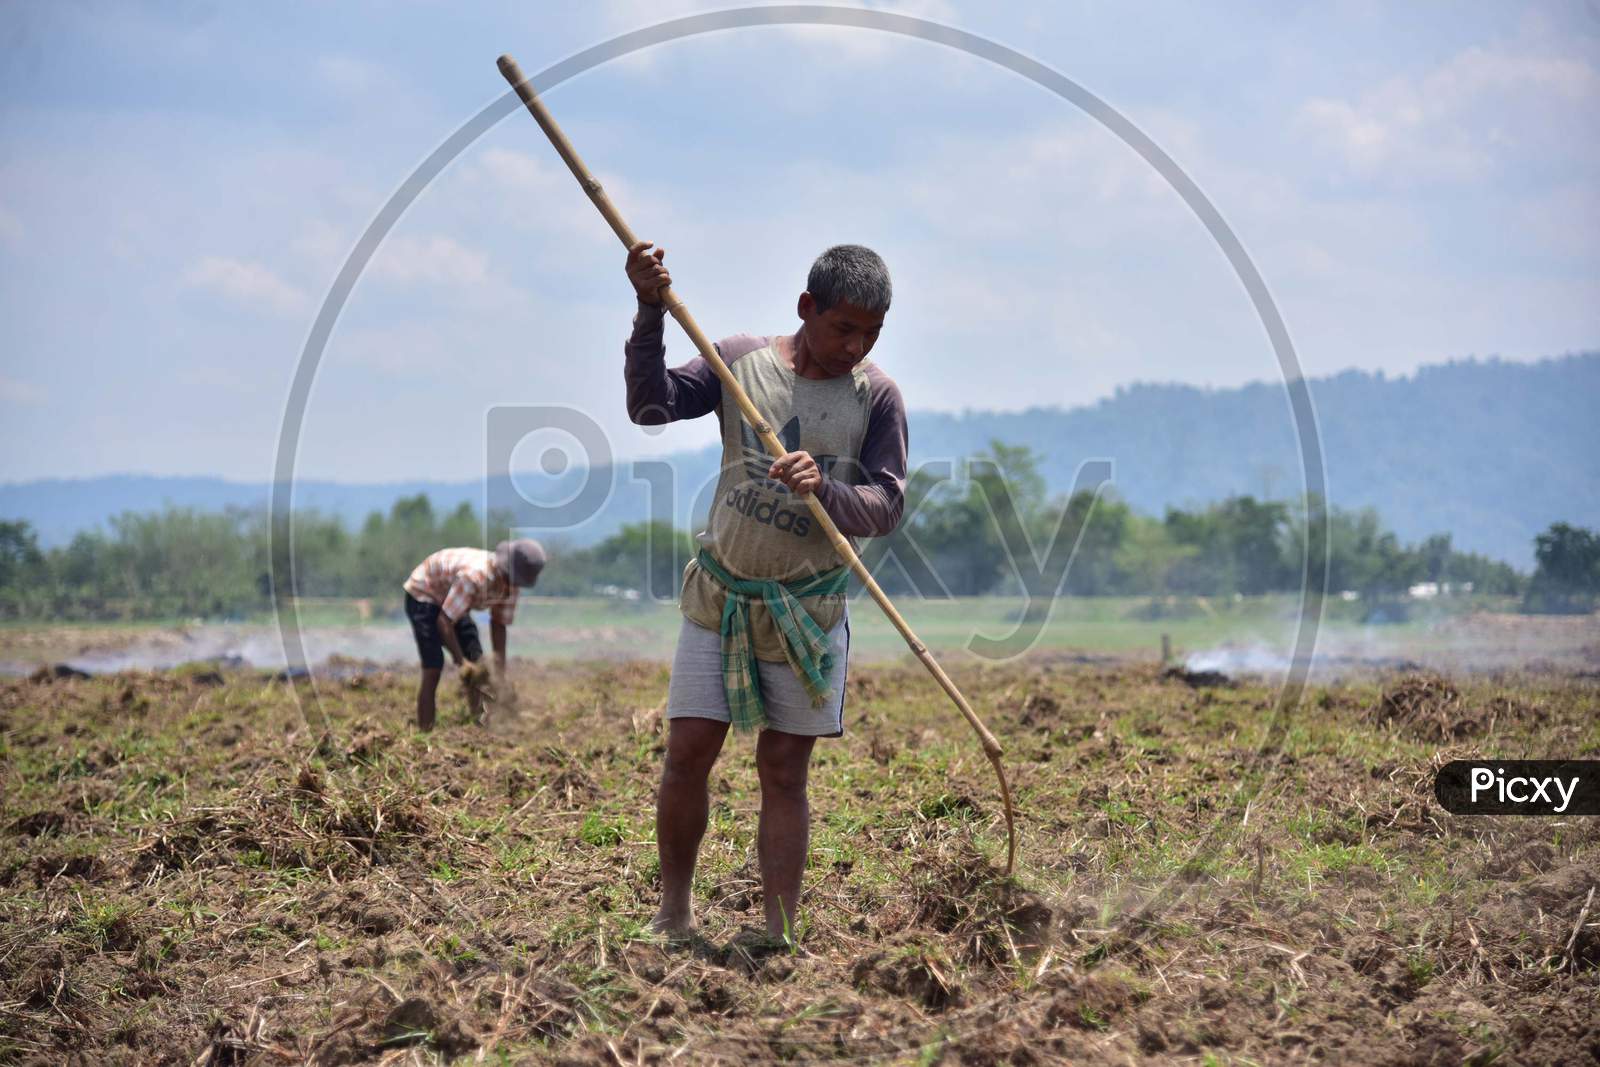 Farmers Prepare A Paddy Field During Nationwide Lockdown Amidst Coronavirus Or COVID-19 Pandemic At Dharamtul In Morigaon District Of Assam On May 2, 2020